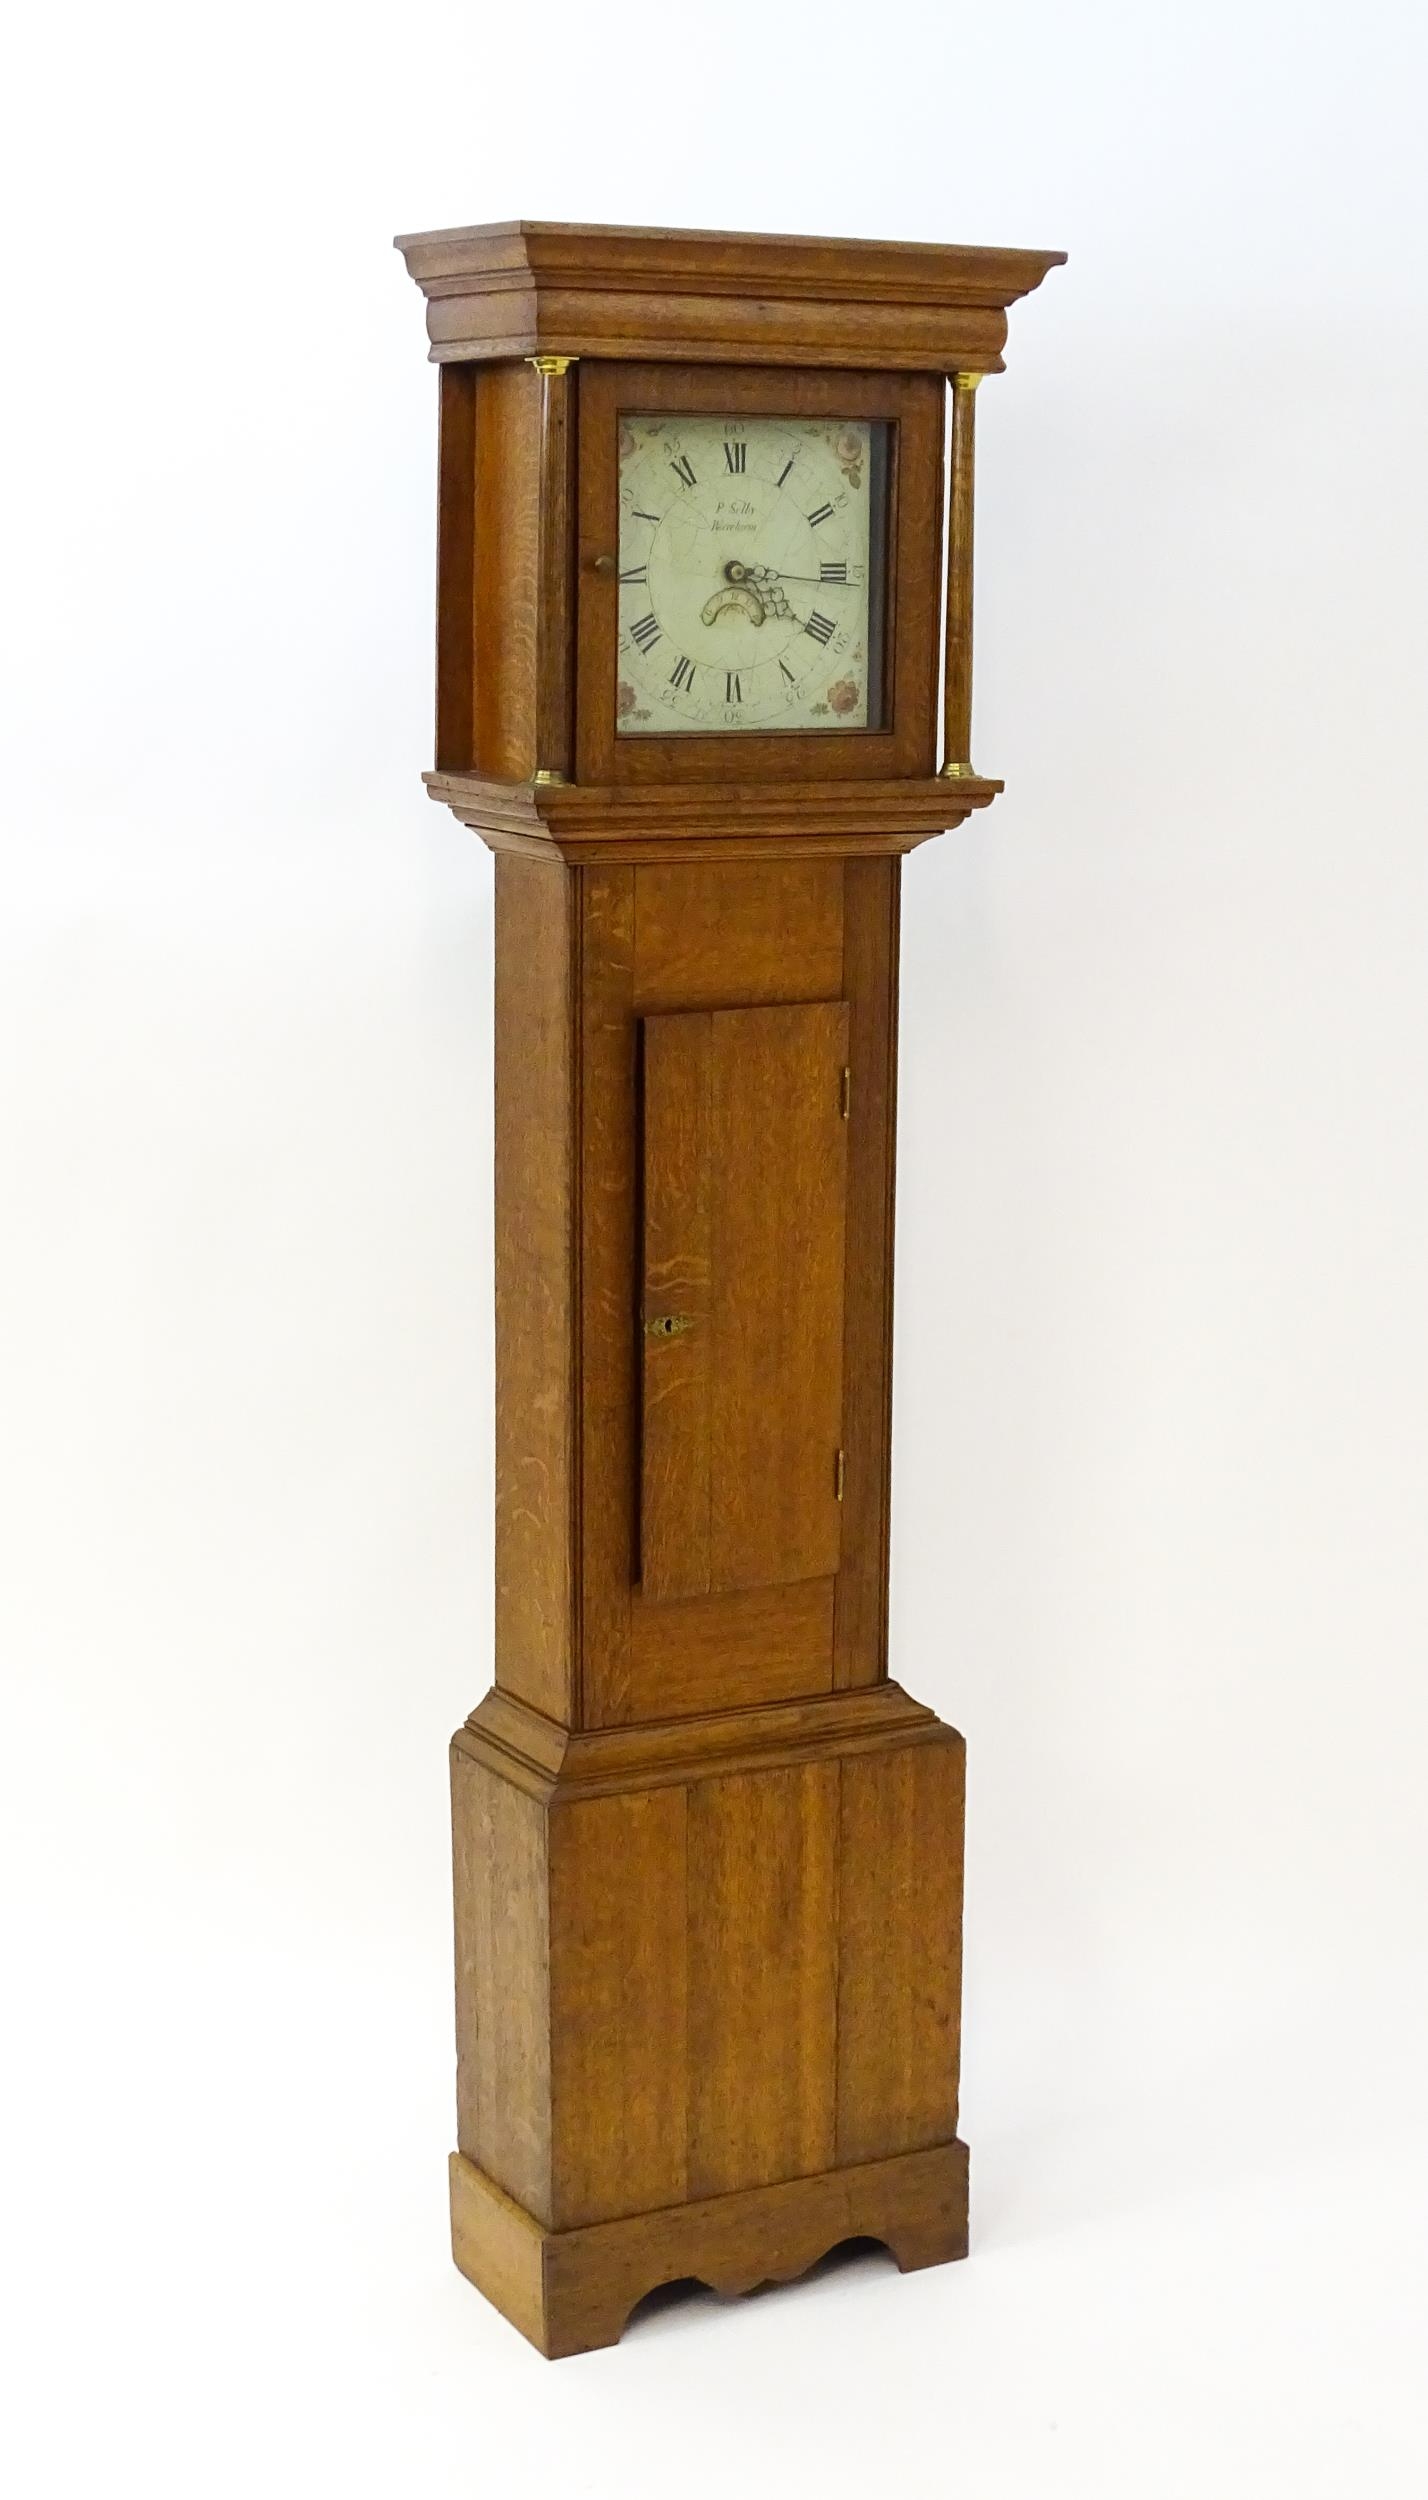 P Selby Wareham - Dorset : A late 18thC oak cased 30 hour longcase clock, the painted dial signed P.